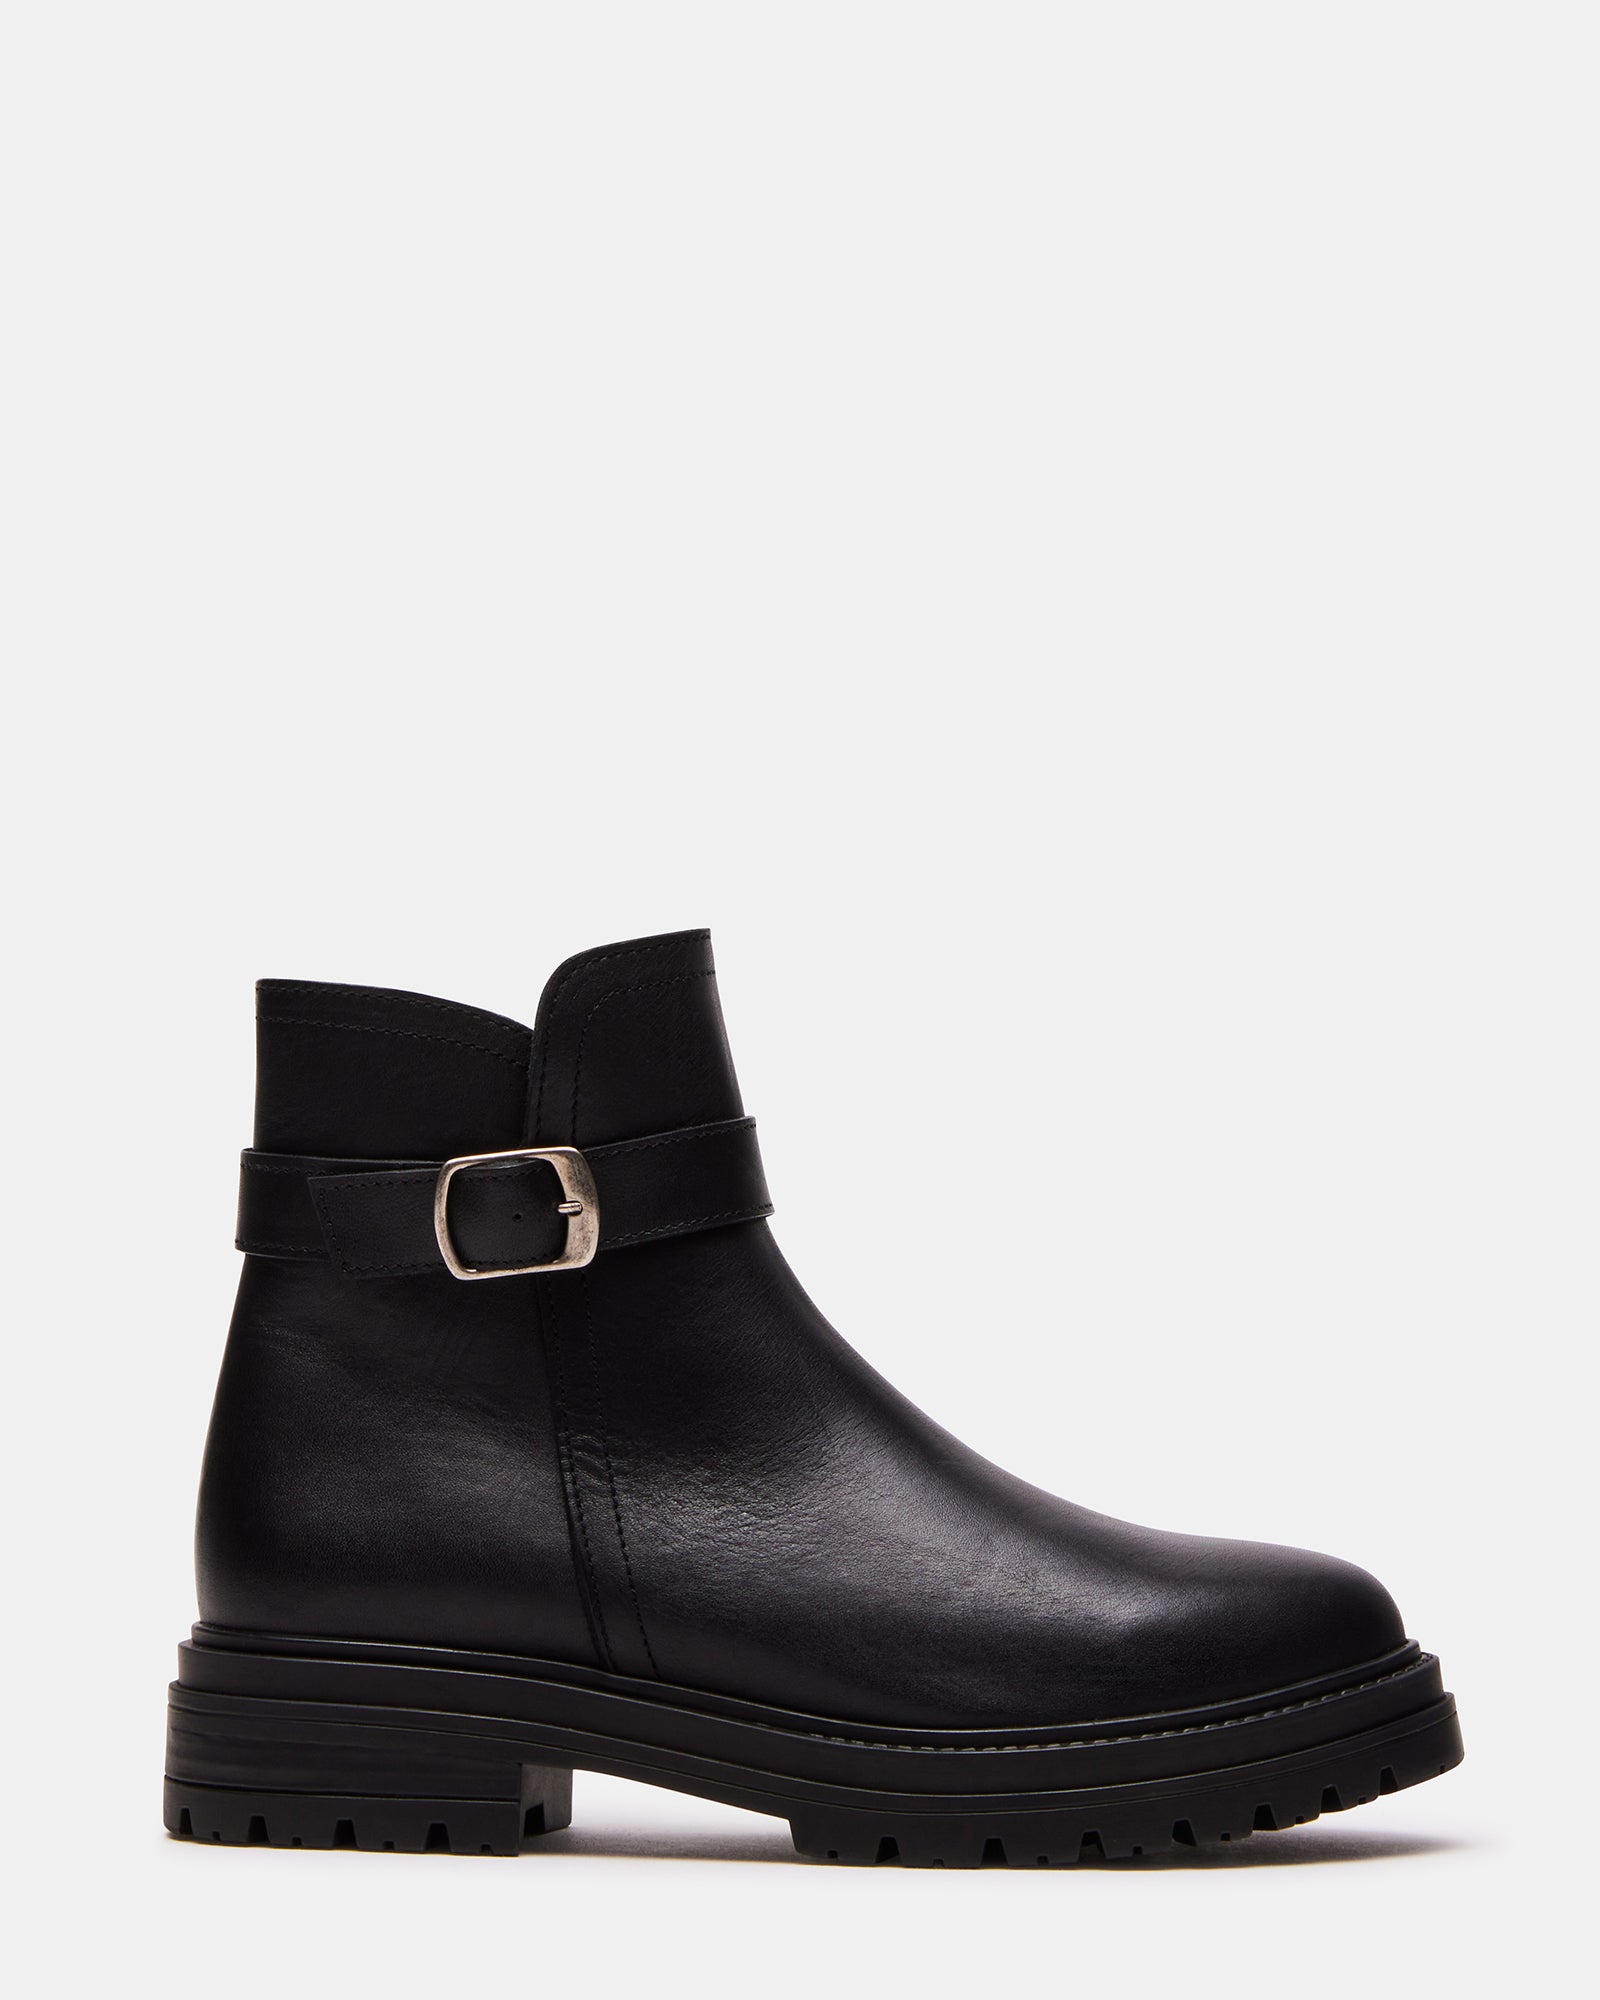 MAEZY Black Leather Lug Sole Ankle Bootie | Women's Booties – Steve Madden